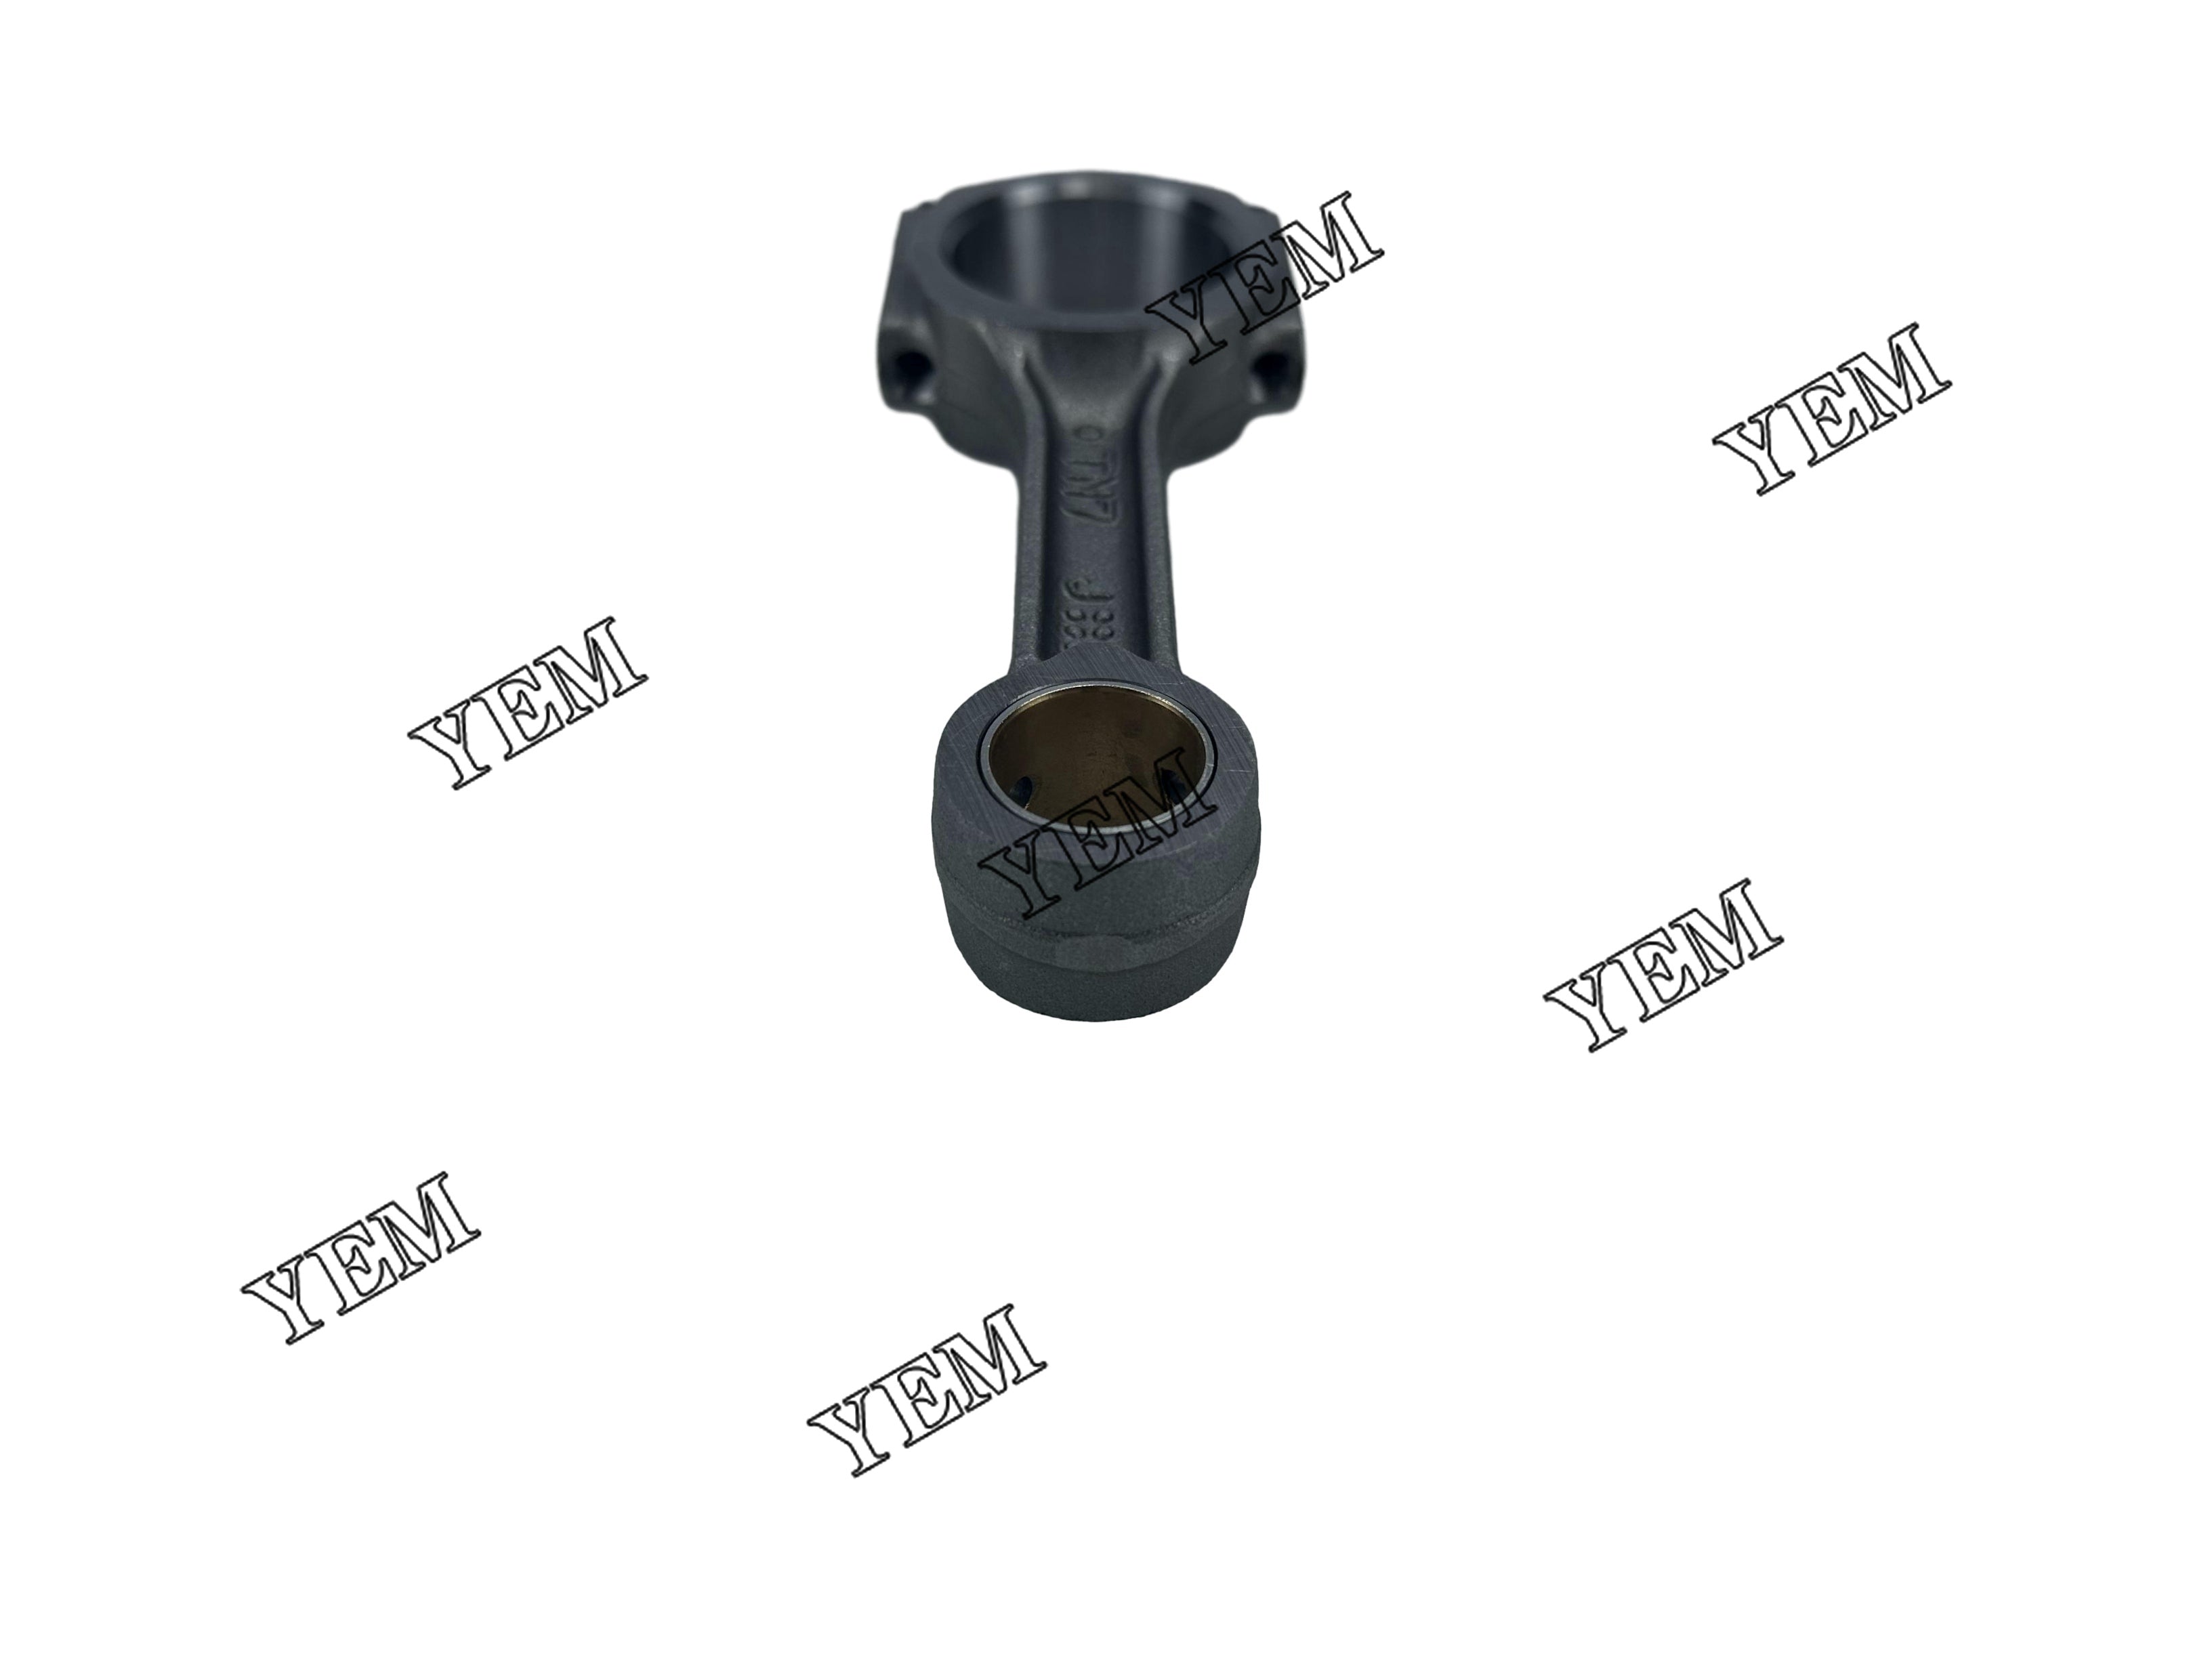 For Yanmar Connecting Rod 3TNC78 Engine Spare Parts YEMPARTS